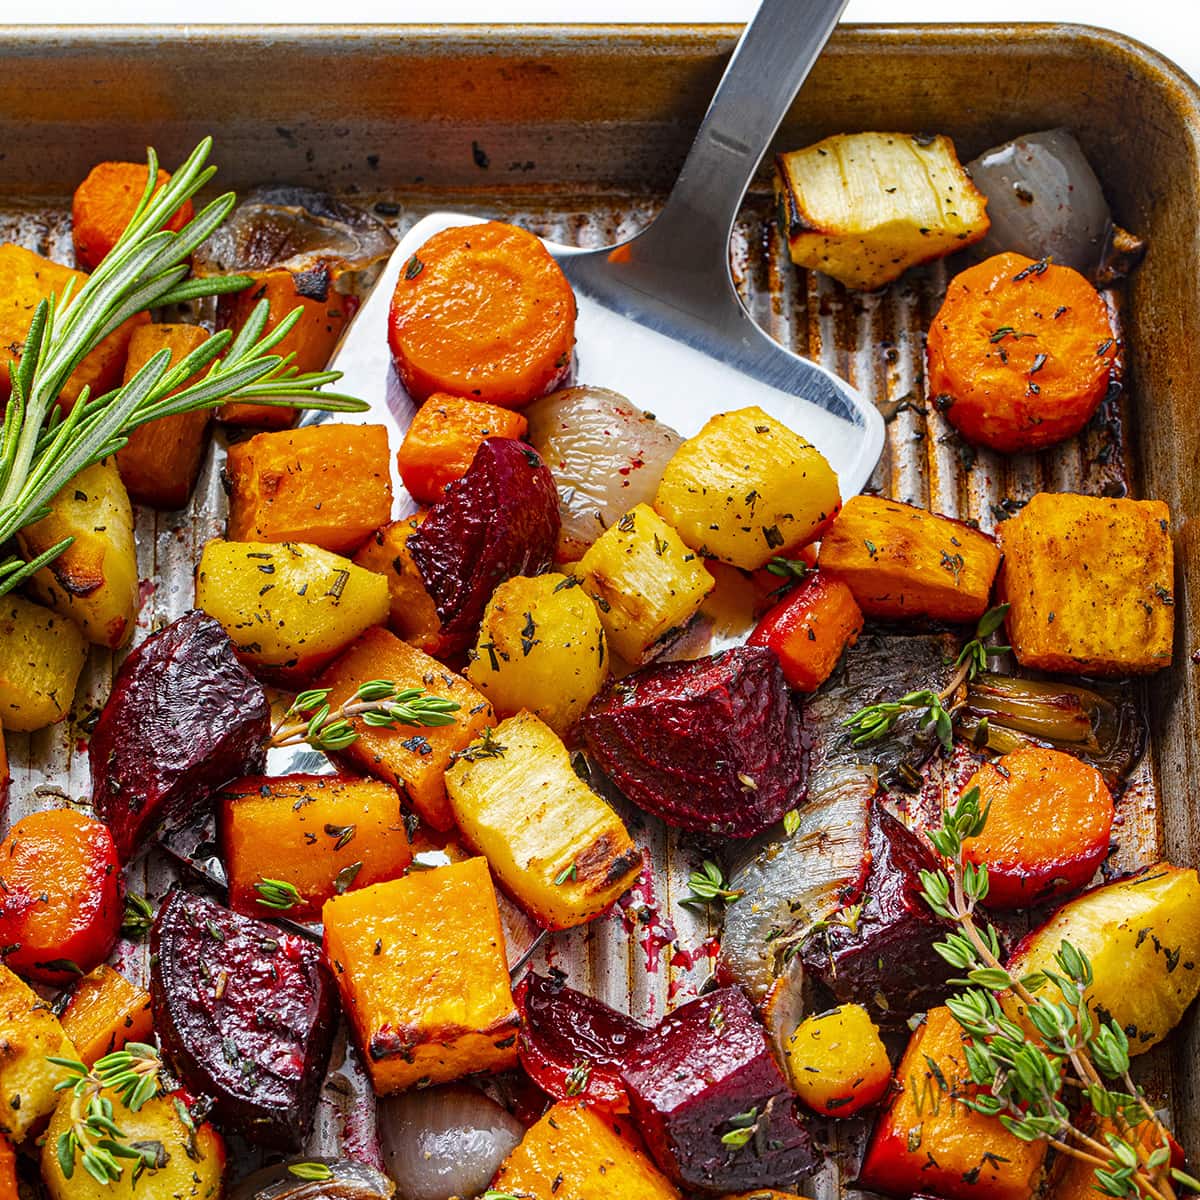 Roasted Root Vegetables – Wholesome and delicious